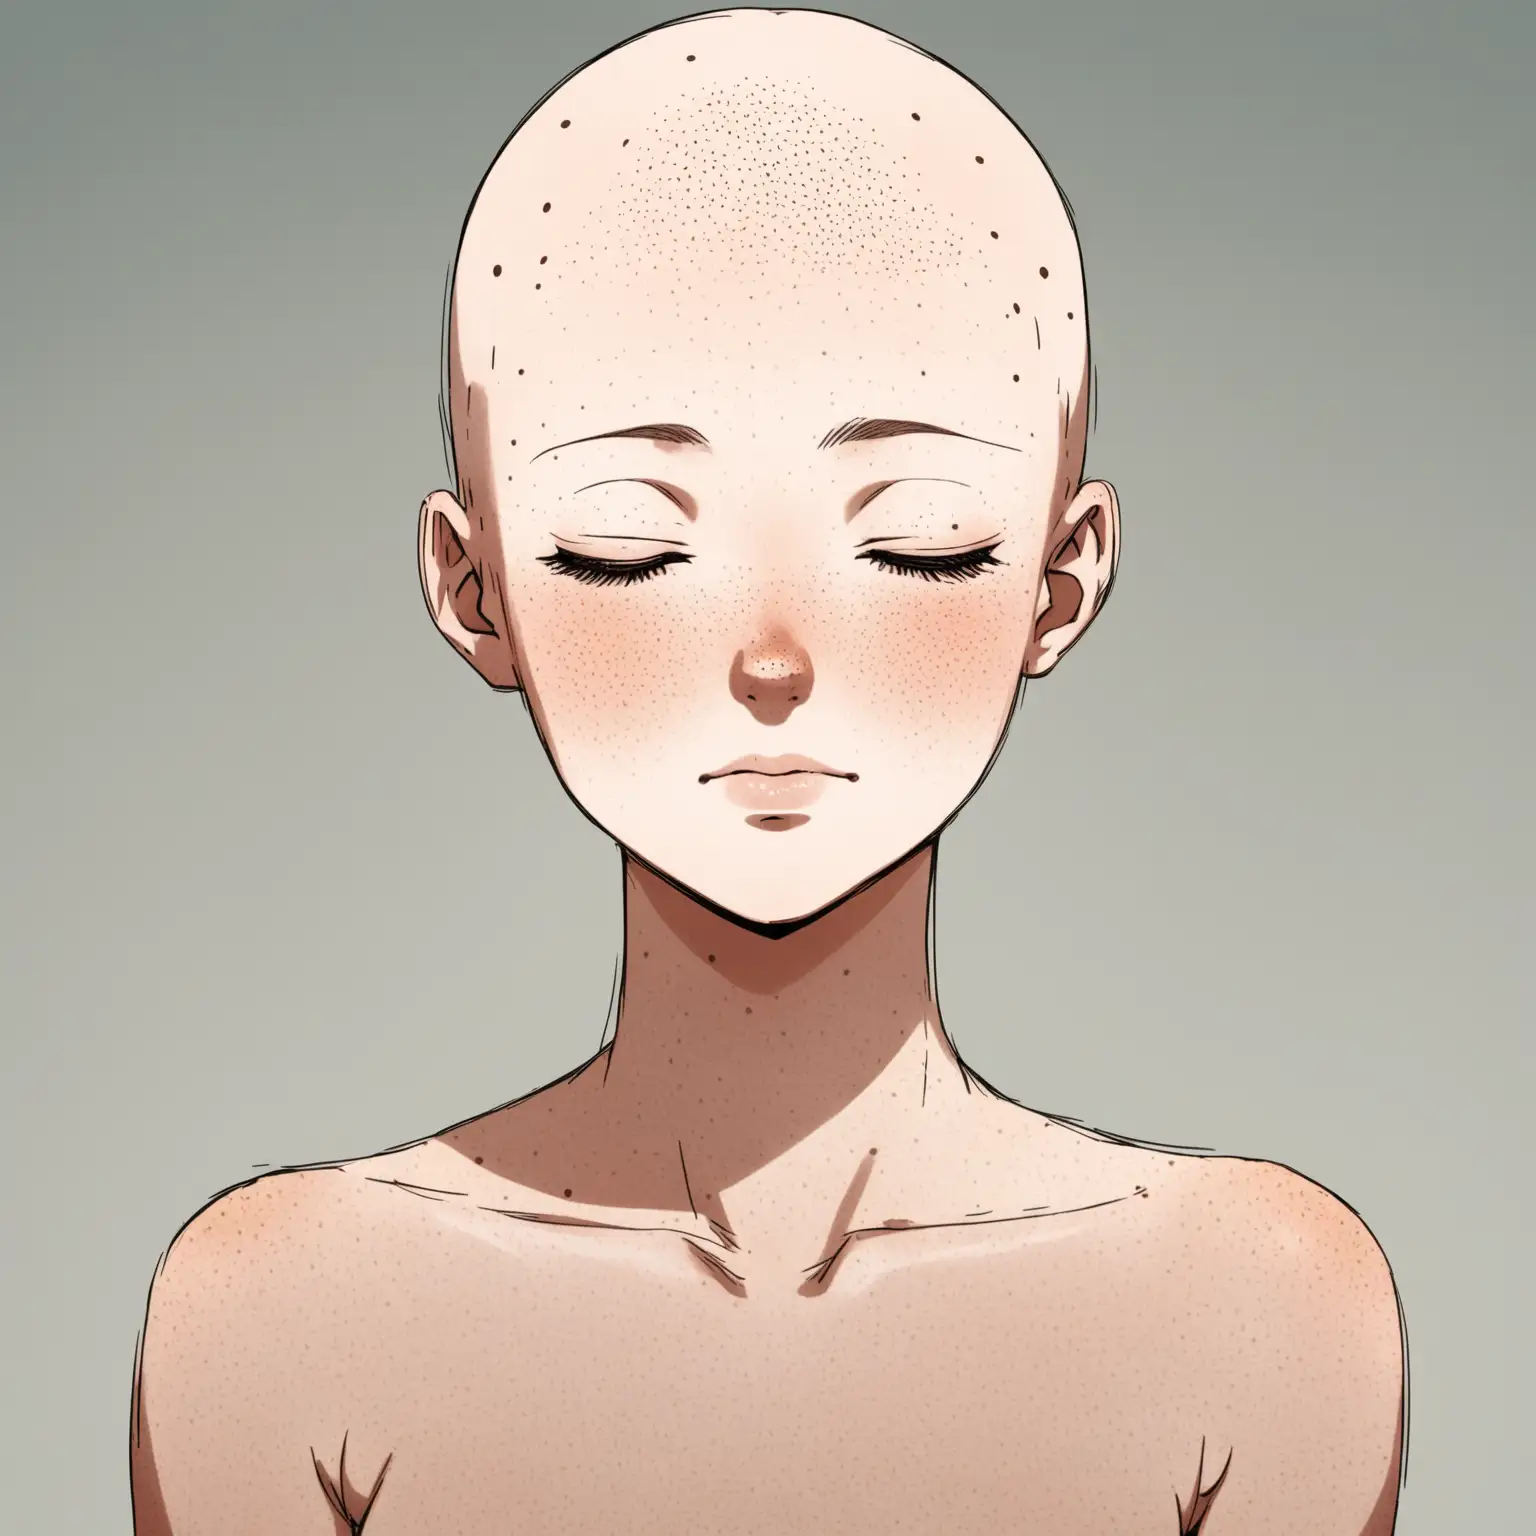 Serene Bald Anime Woman with Closed Eyes and Freckles Frontal Portrait